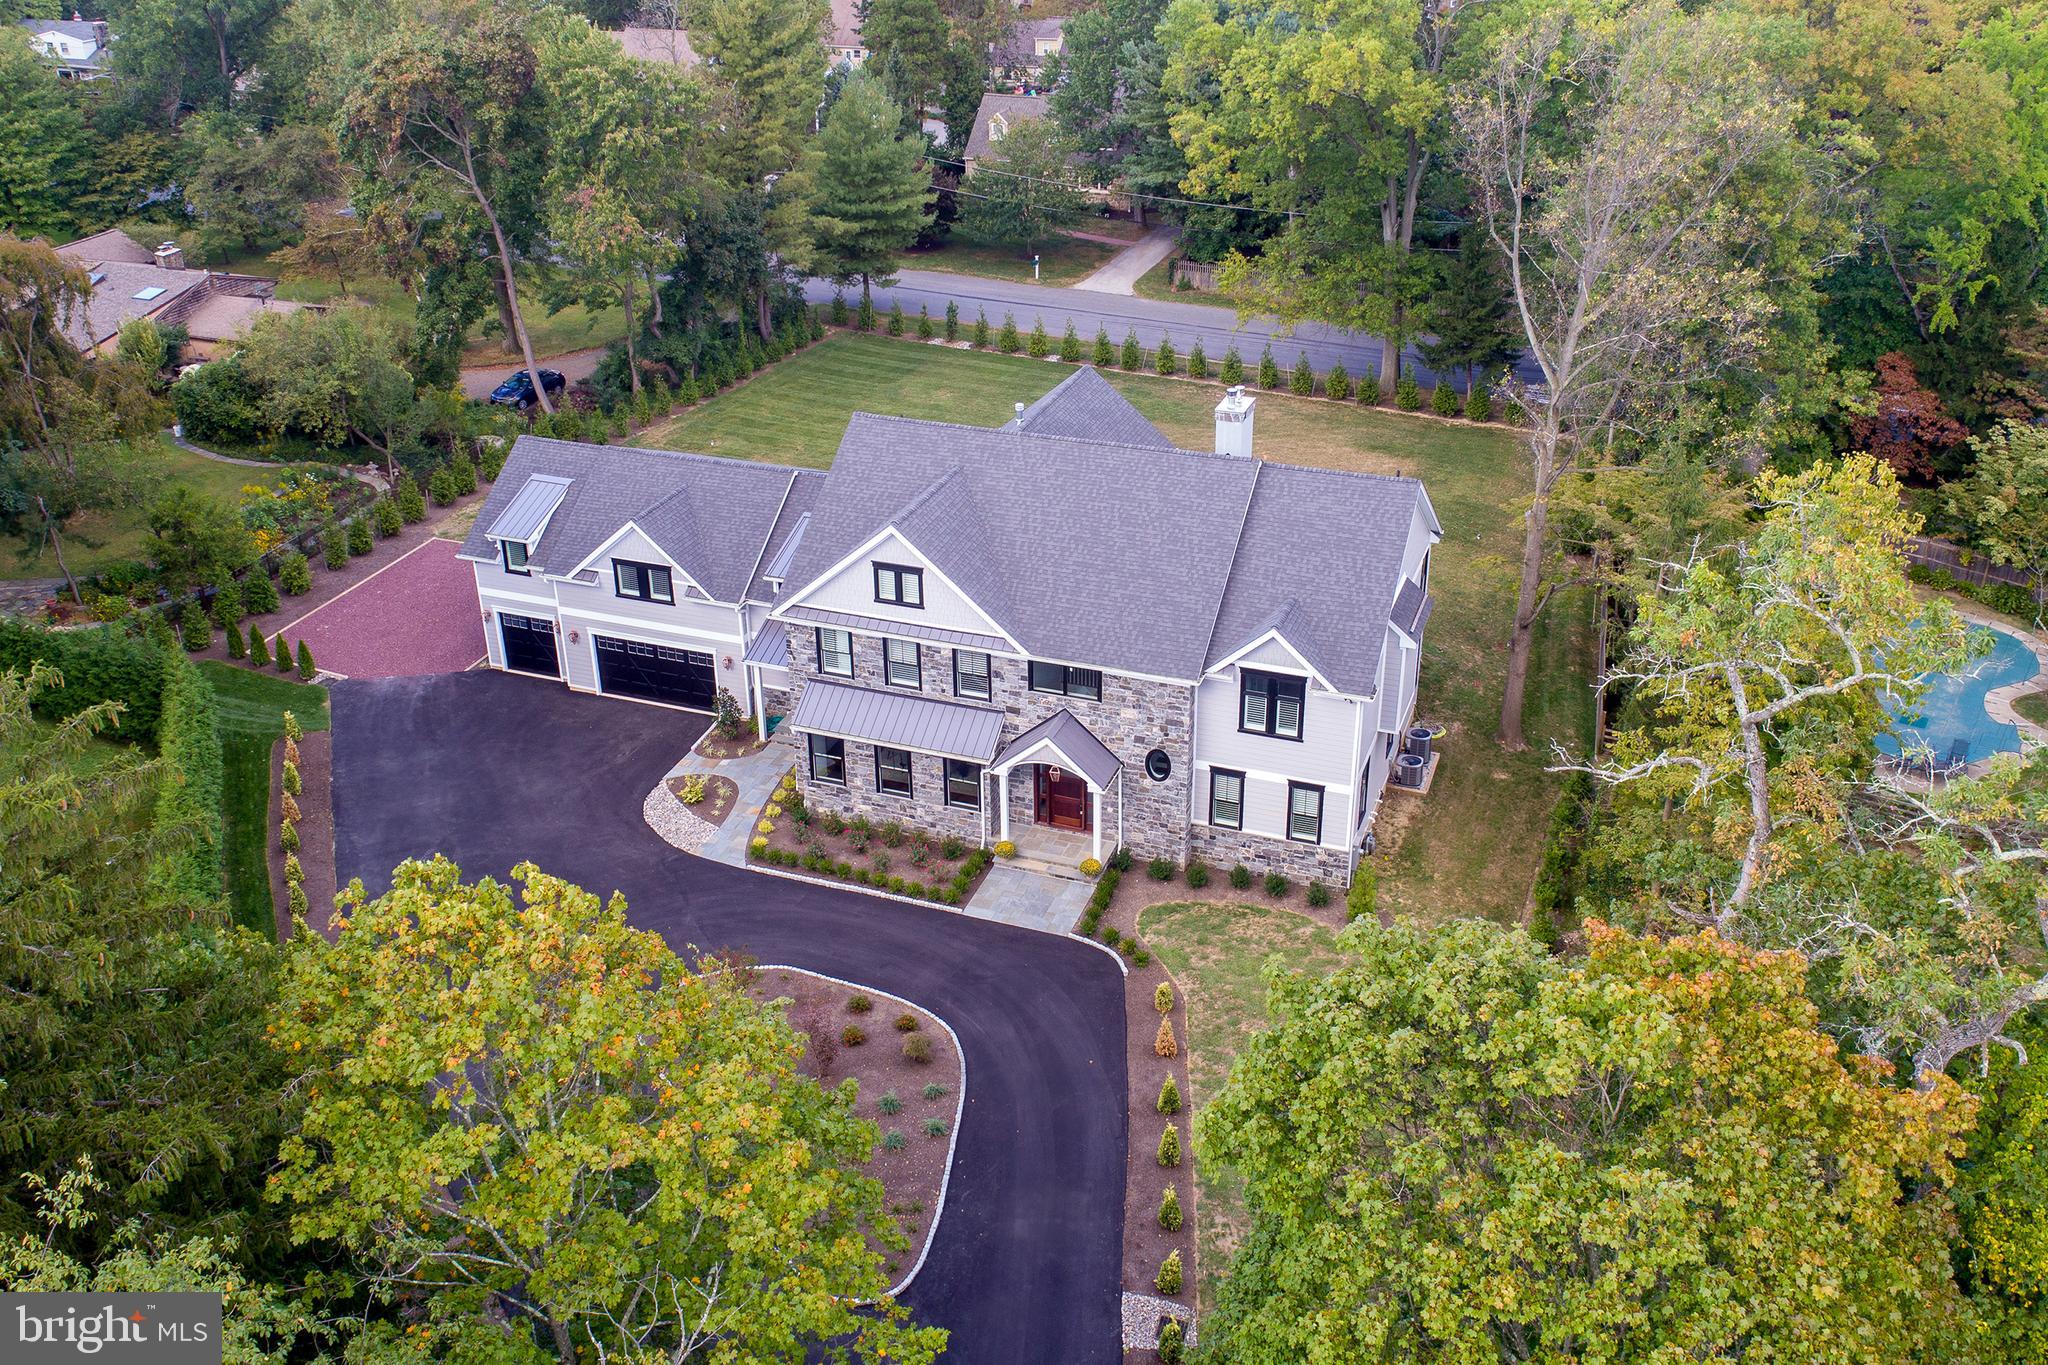 an aerial view of a house with garden space sitting space